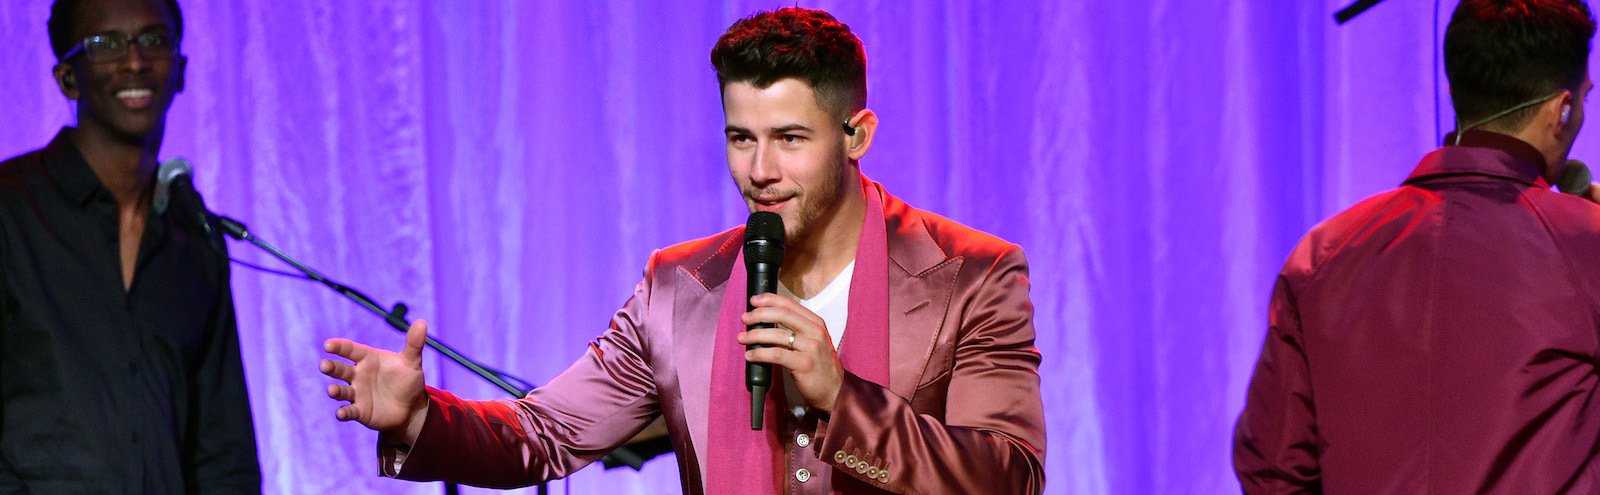 Nick Jonas Will Host And Perform On An Upcoming Episode Of ‘Saturday Night Live’